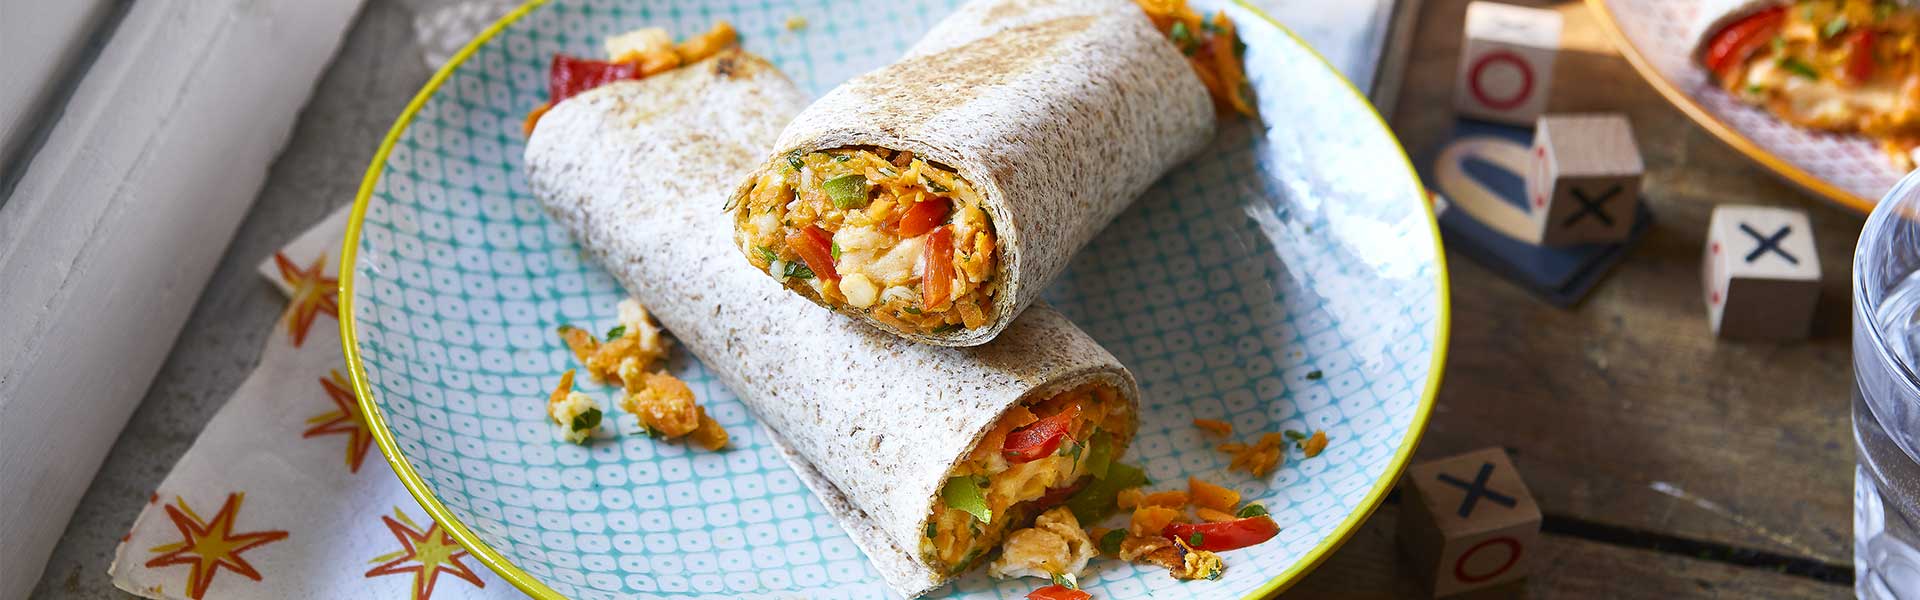 Two burrito wraps on a checked blue plate - Father's Day breakfasts - Goodhomesmagazine.com